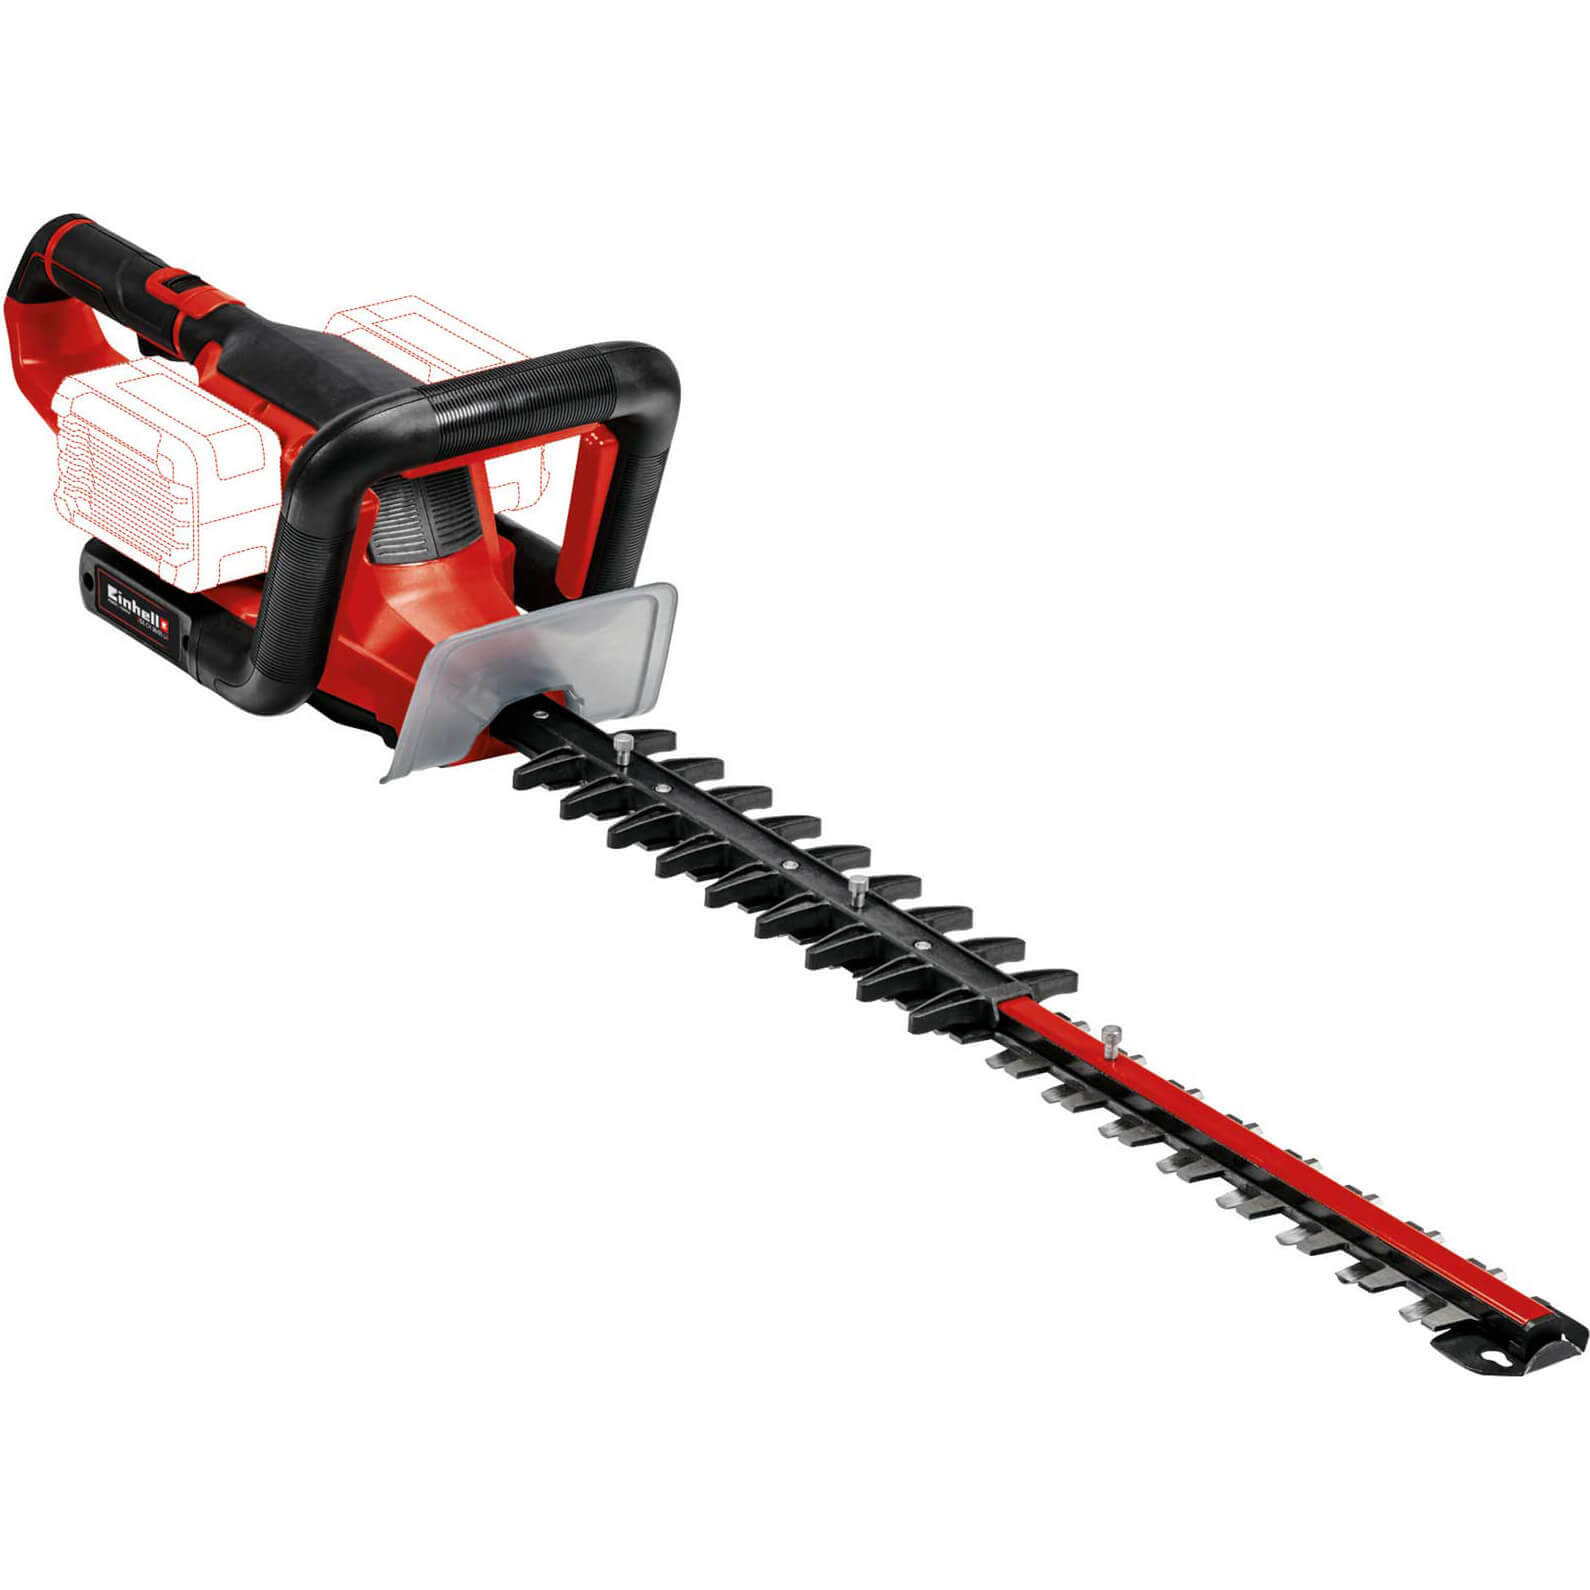 Photo of Einhell Ge-ch 36/65 Li 36v Cordless Hedge Trimmer 650mm -uses 2 X 18v- No Batteries No Charger